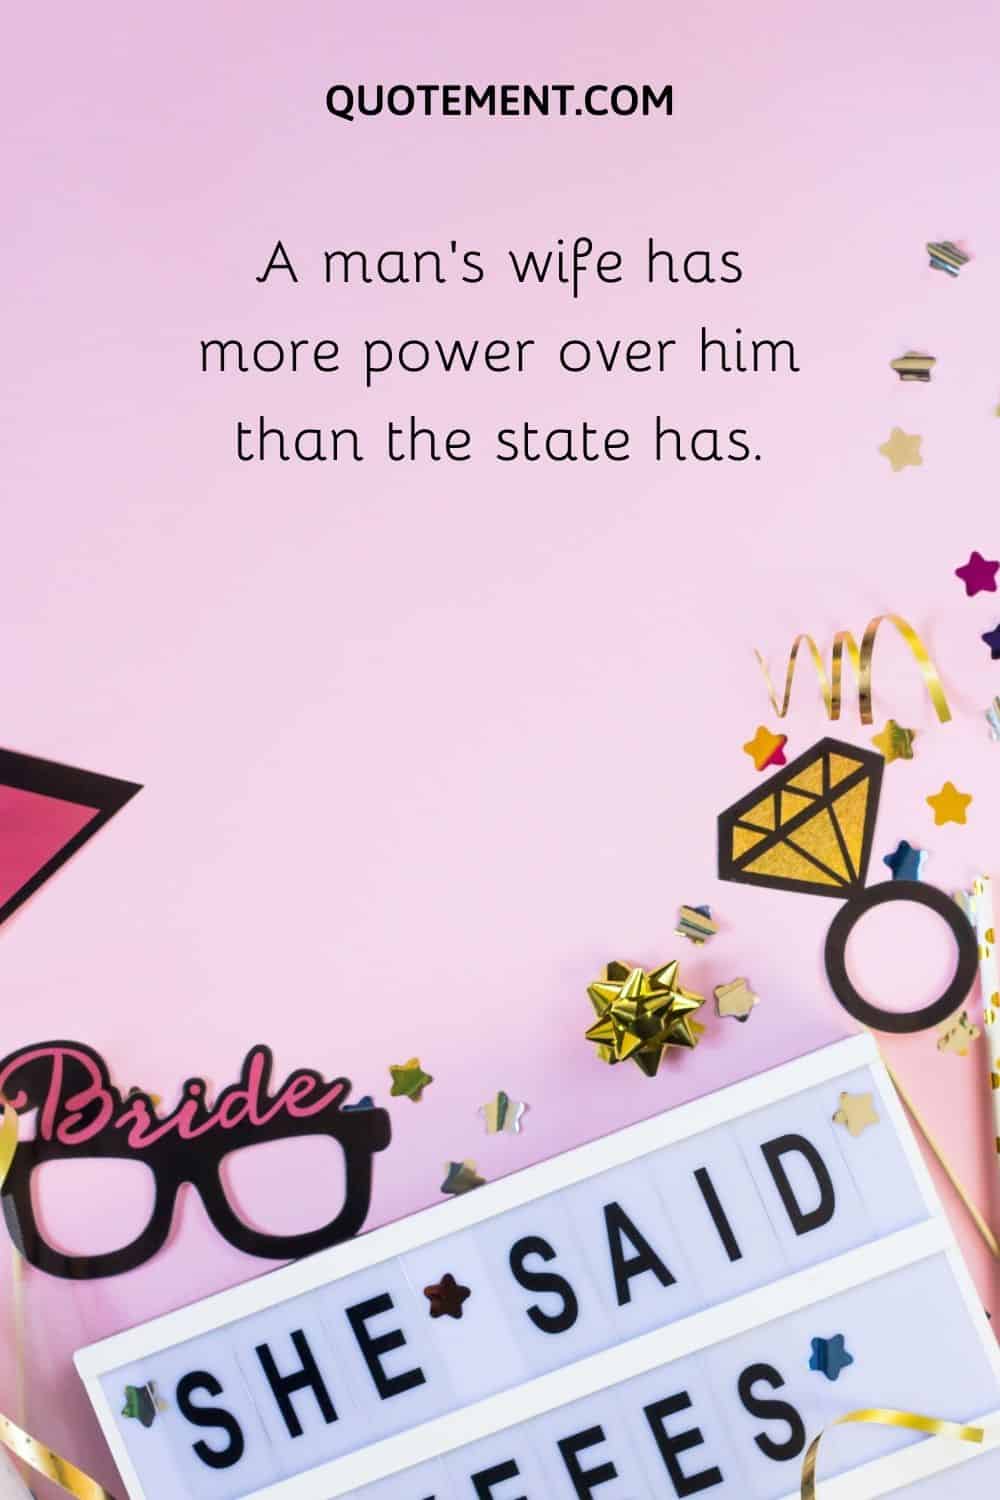 A man’s wife has more power over him than the state has.